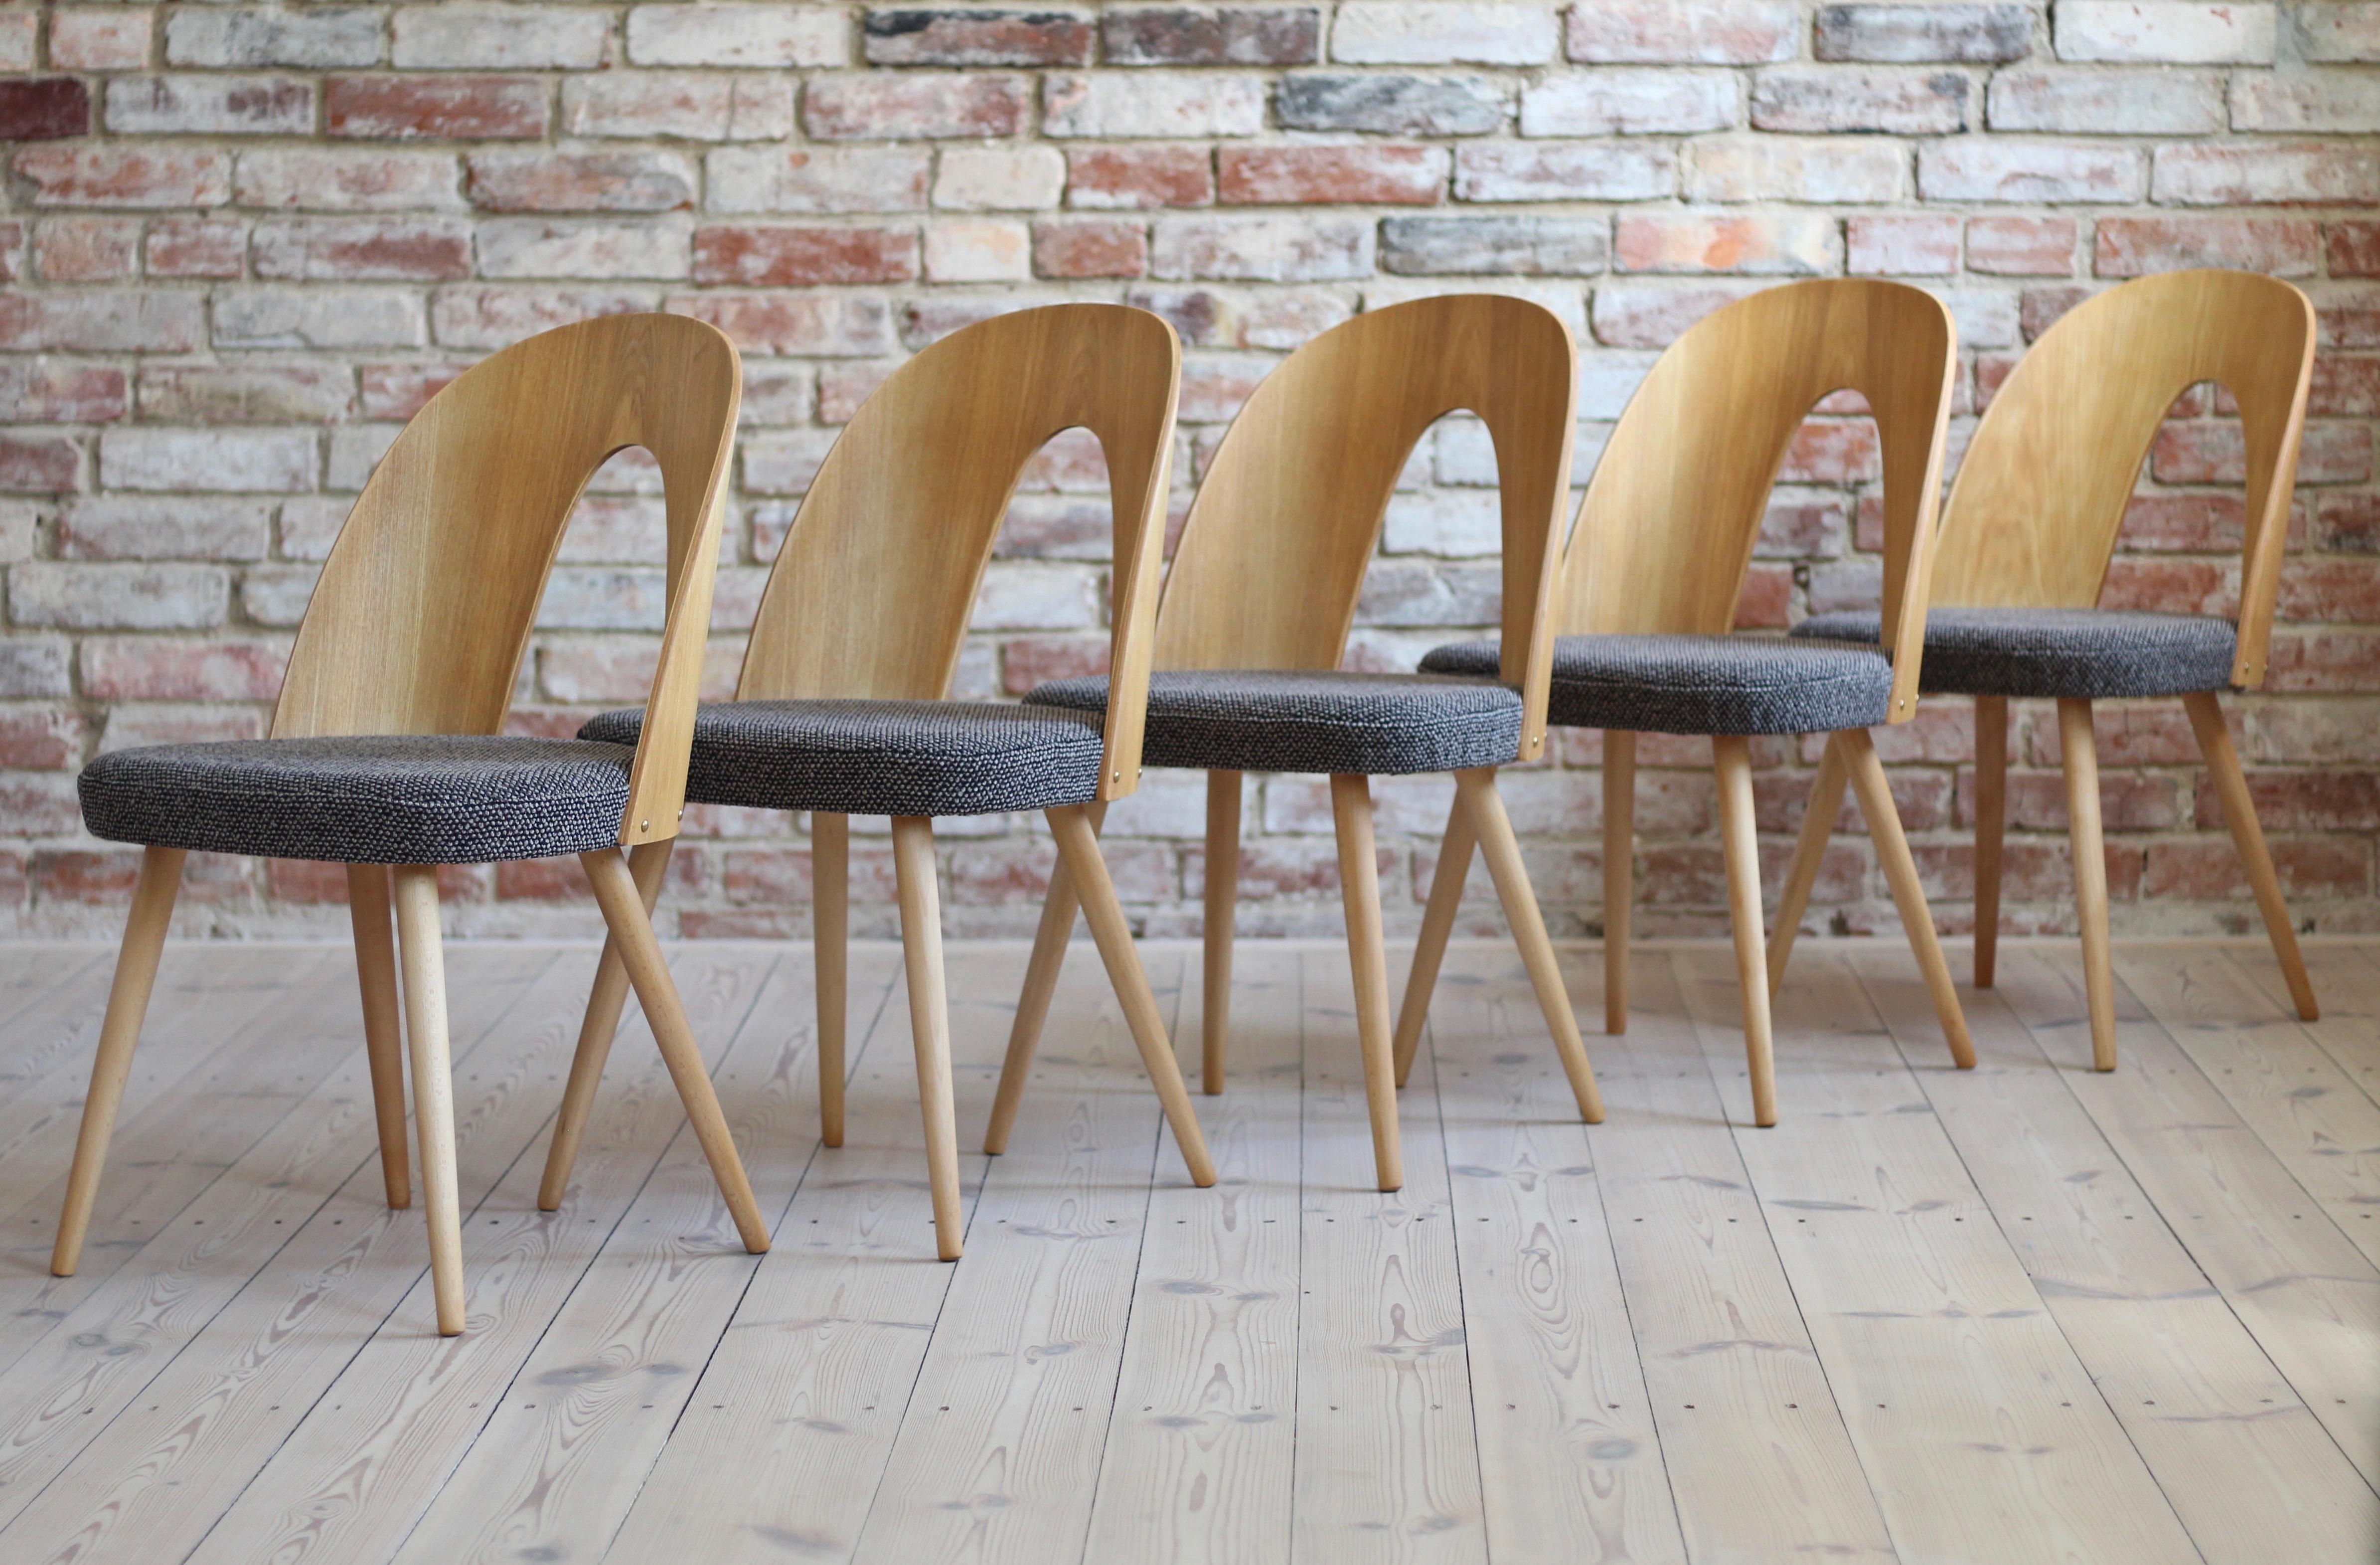 This set of ten vintage dining chairs was designed by Czech designer Antonin Šuman in the 1960s. The chairs have been completely restored finished with high-quality oil that gave them beautiful and natural finish. This set is reupholstered with